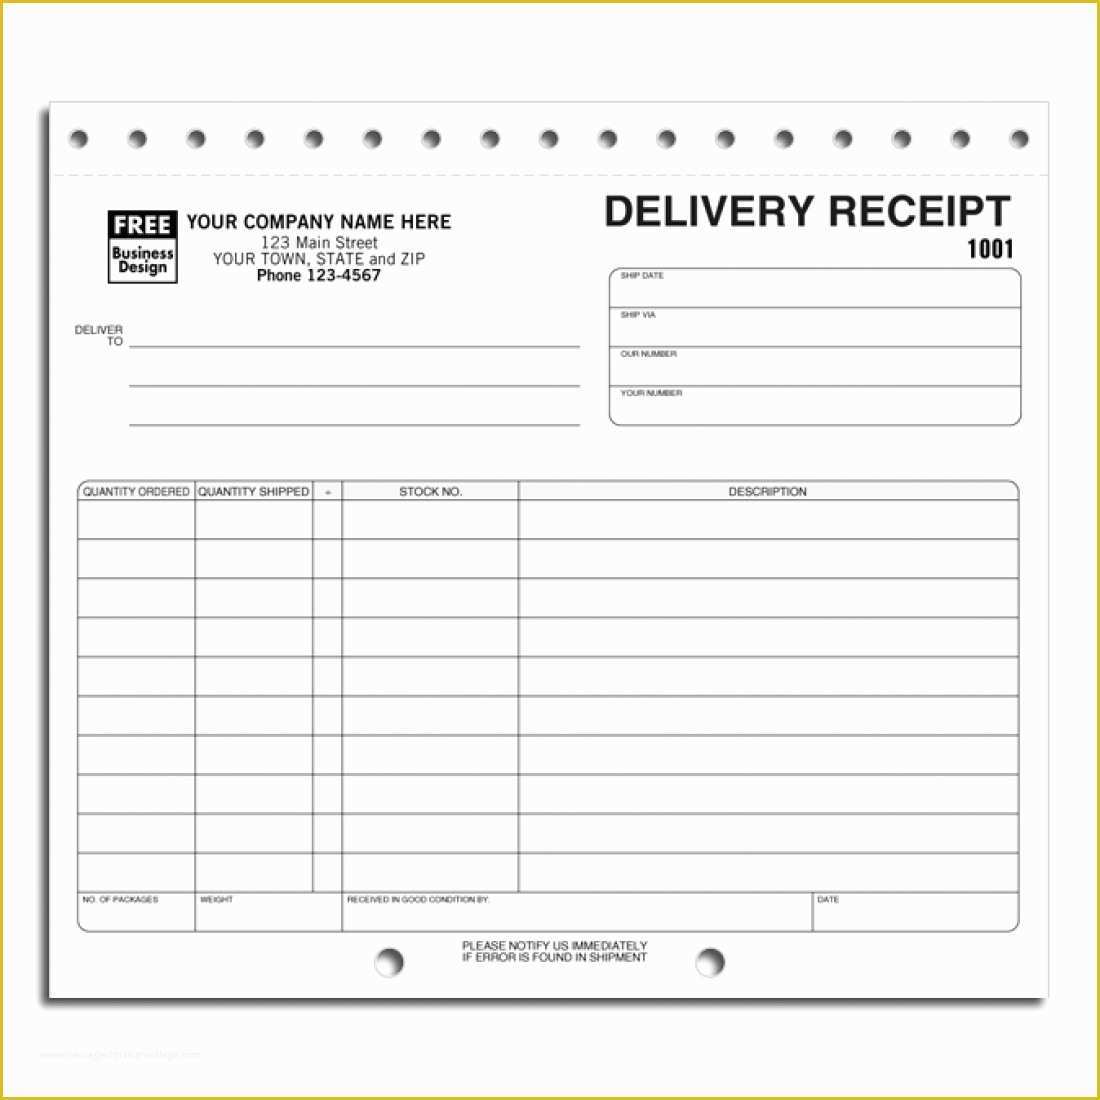 Free Online Receipt Template Of Preprinted Delivery Receipt forms